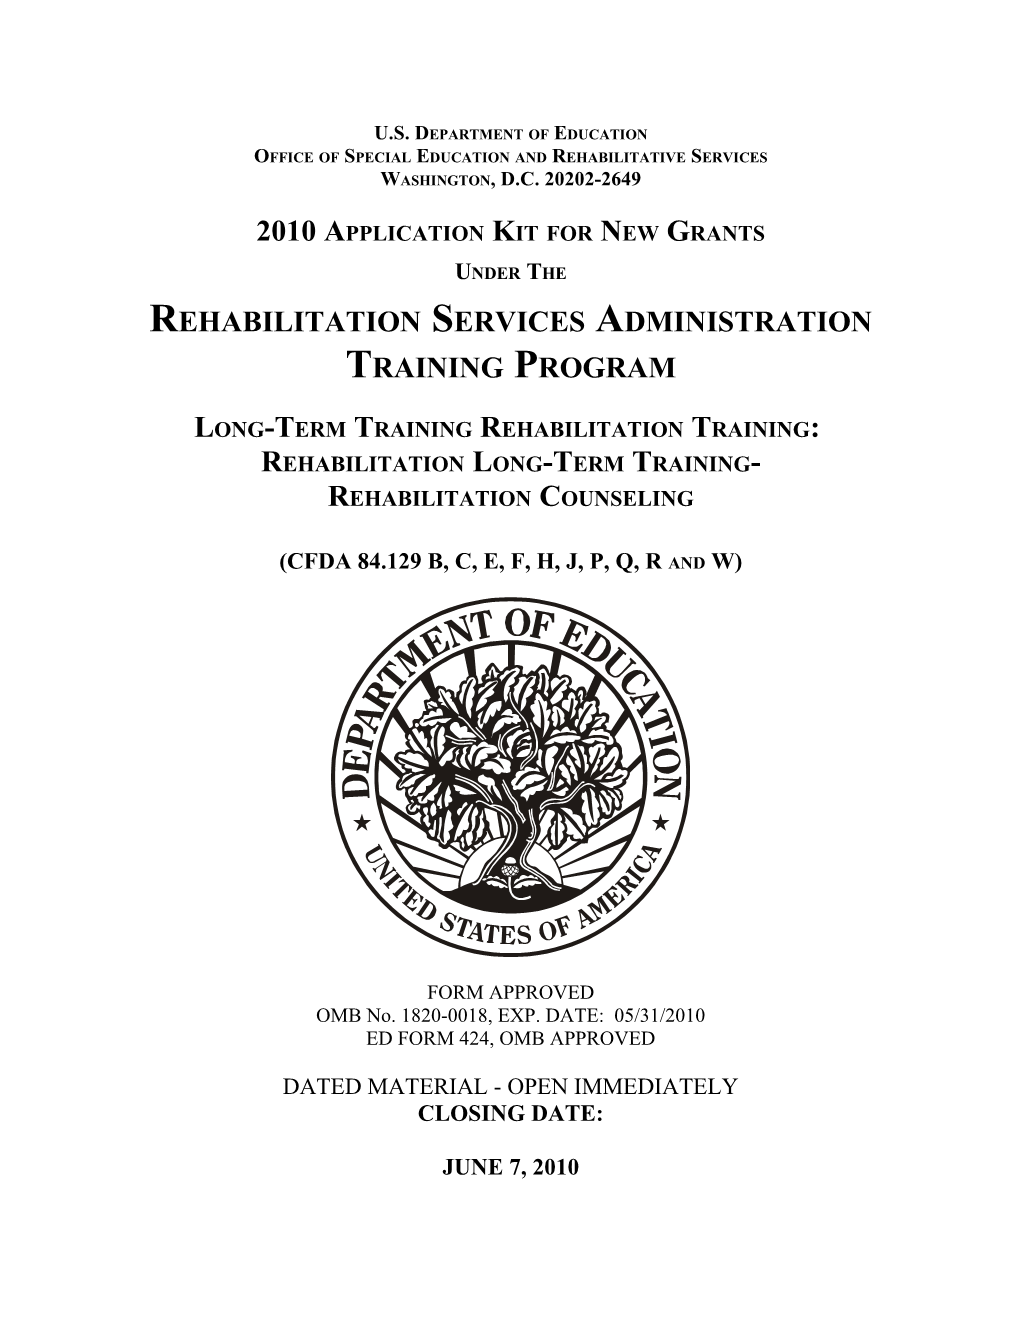 2010 Application Kit for New Grants Under the Rehabilitation Services Administration Training